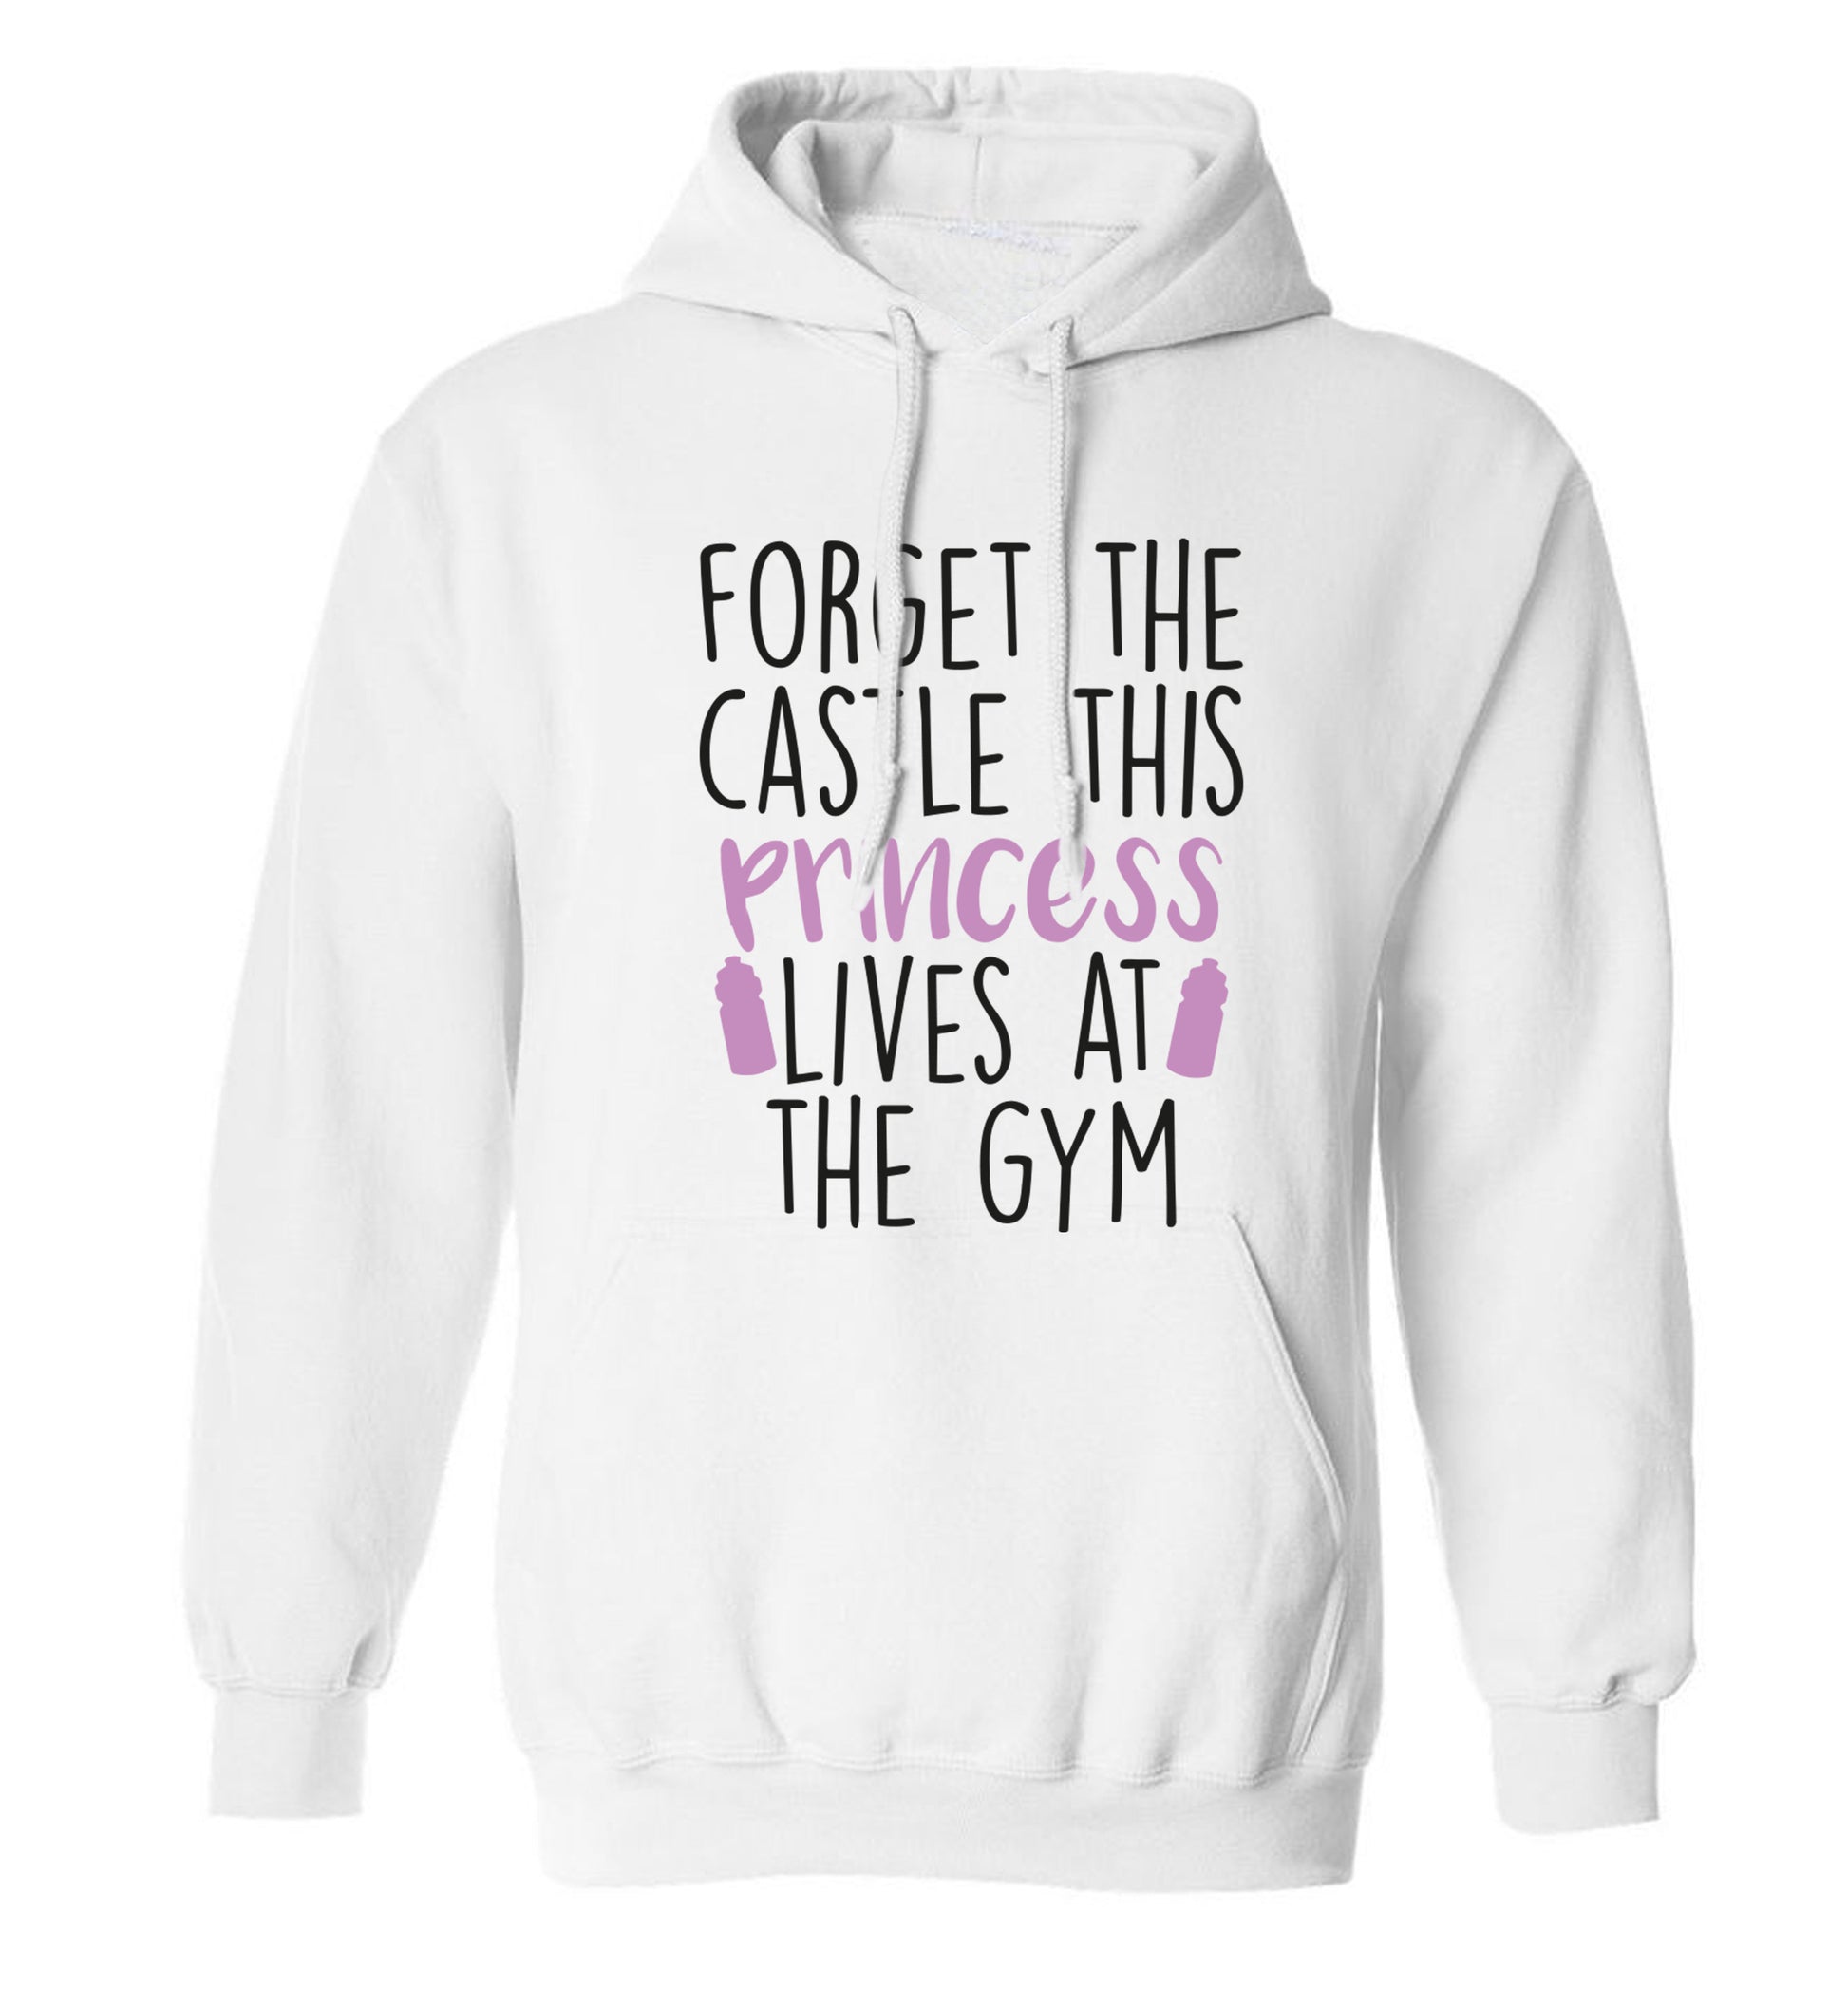 Forget the castle this princess lives at the gym adults unisex white hoodie 2XL